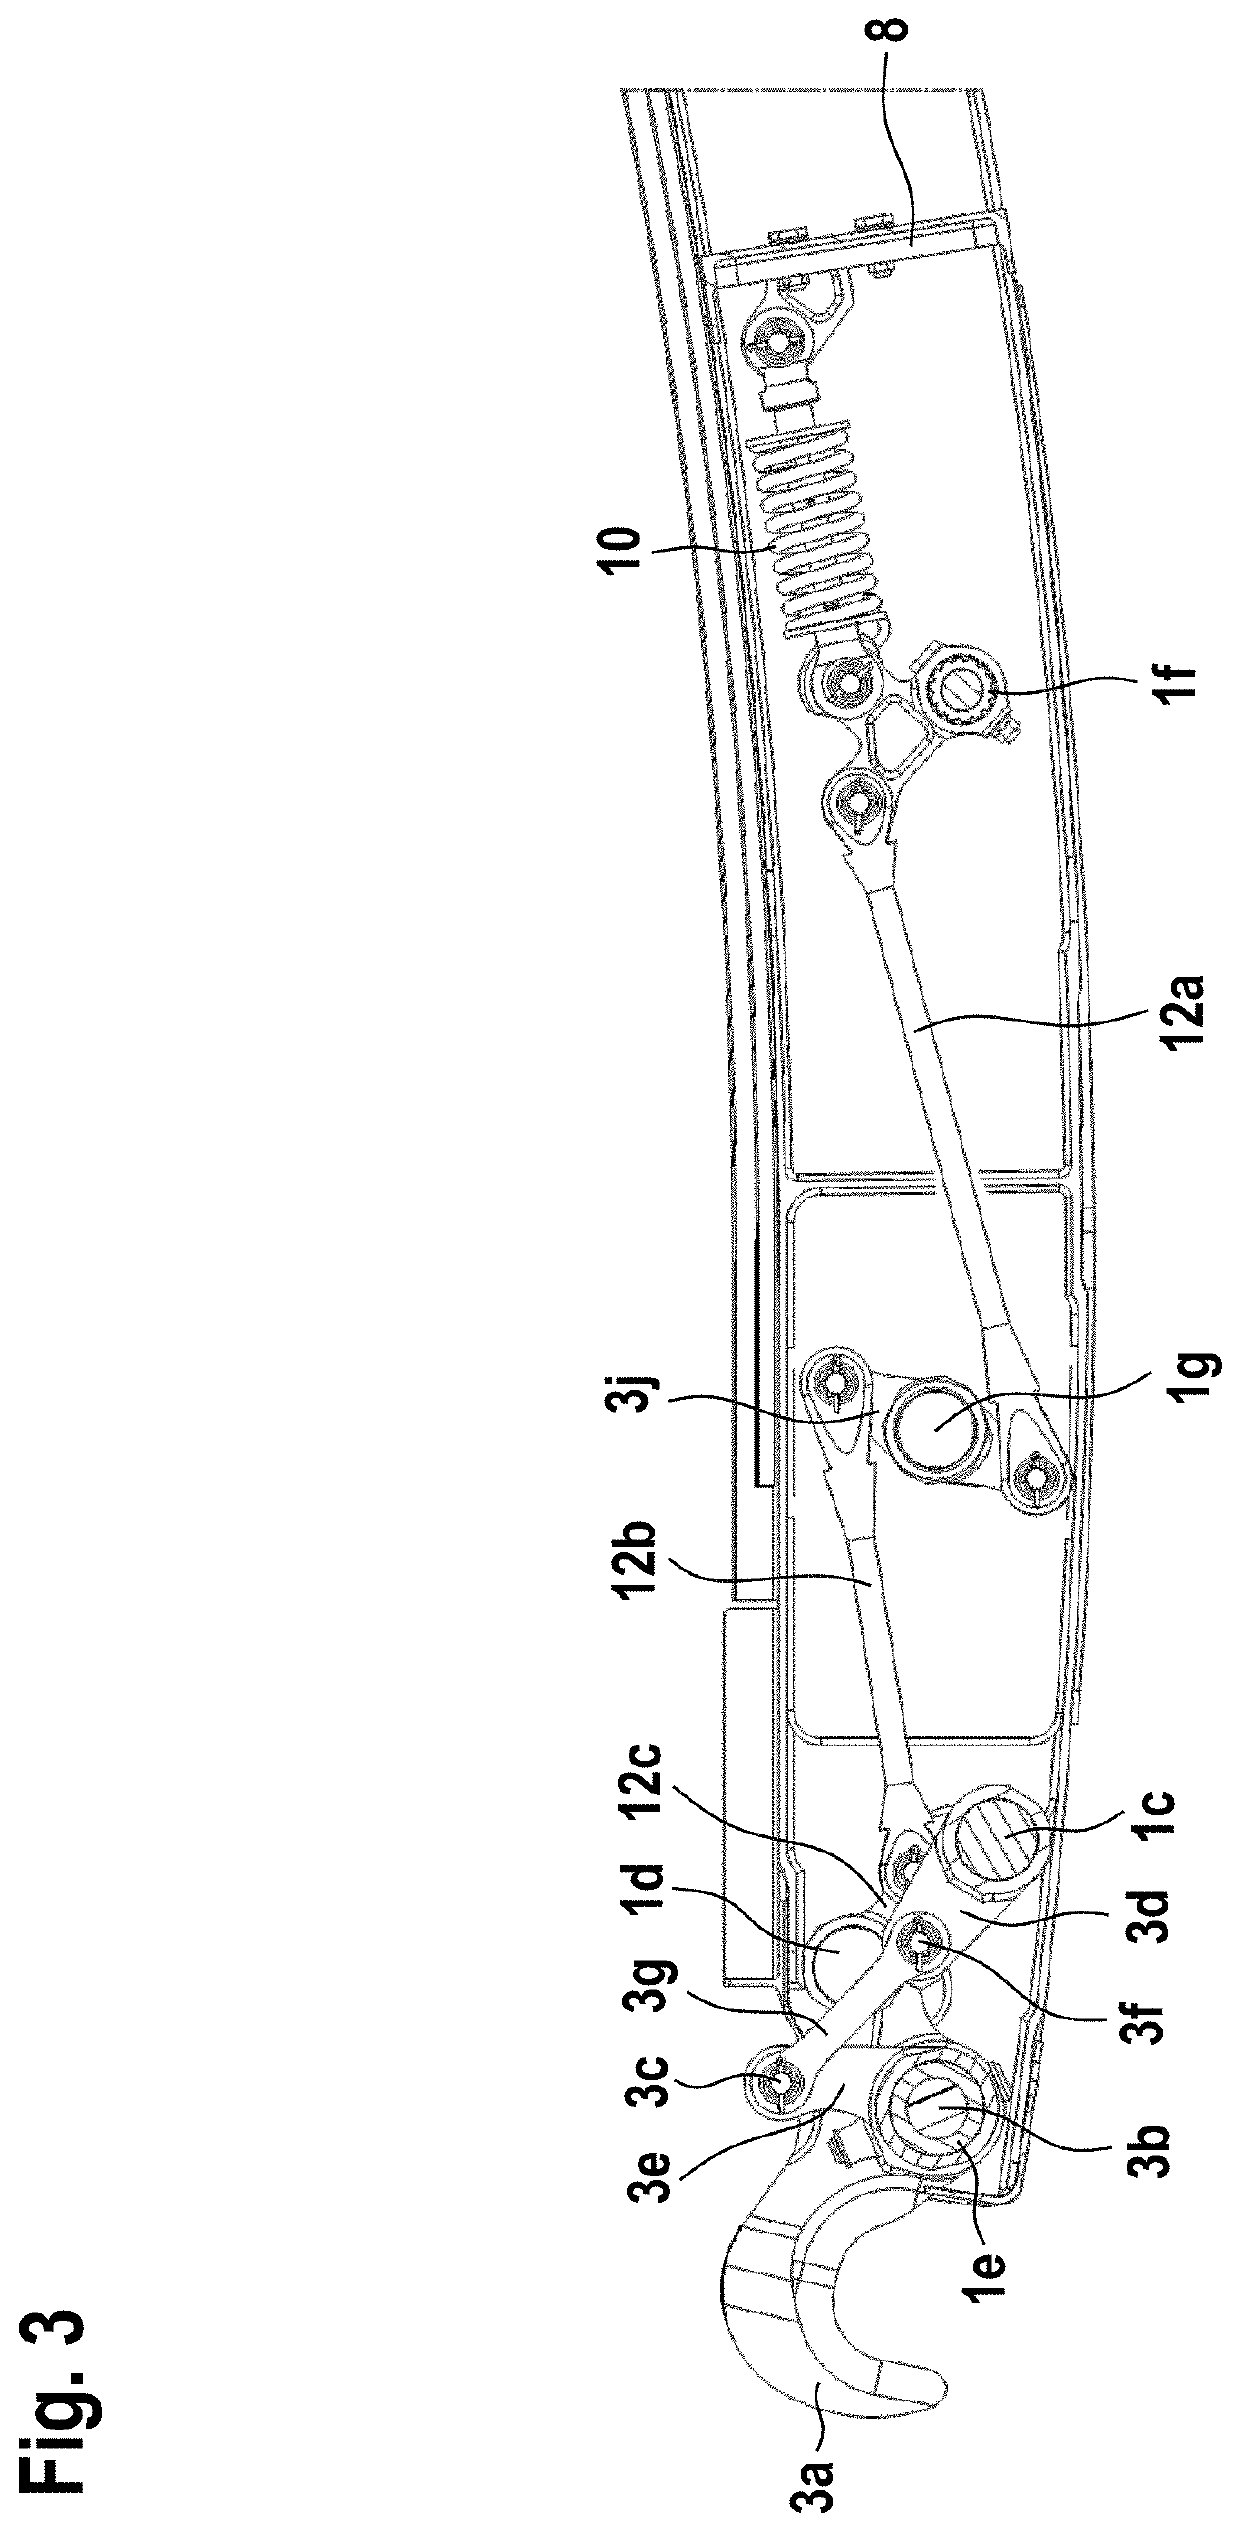 Actuating system for an actuatable door